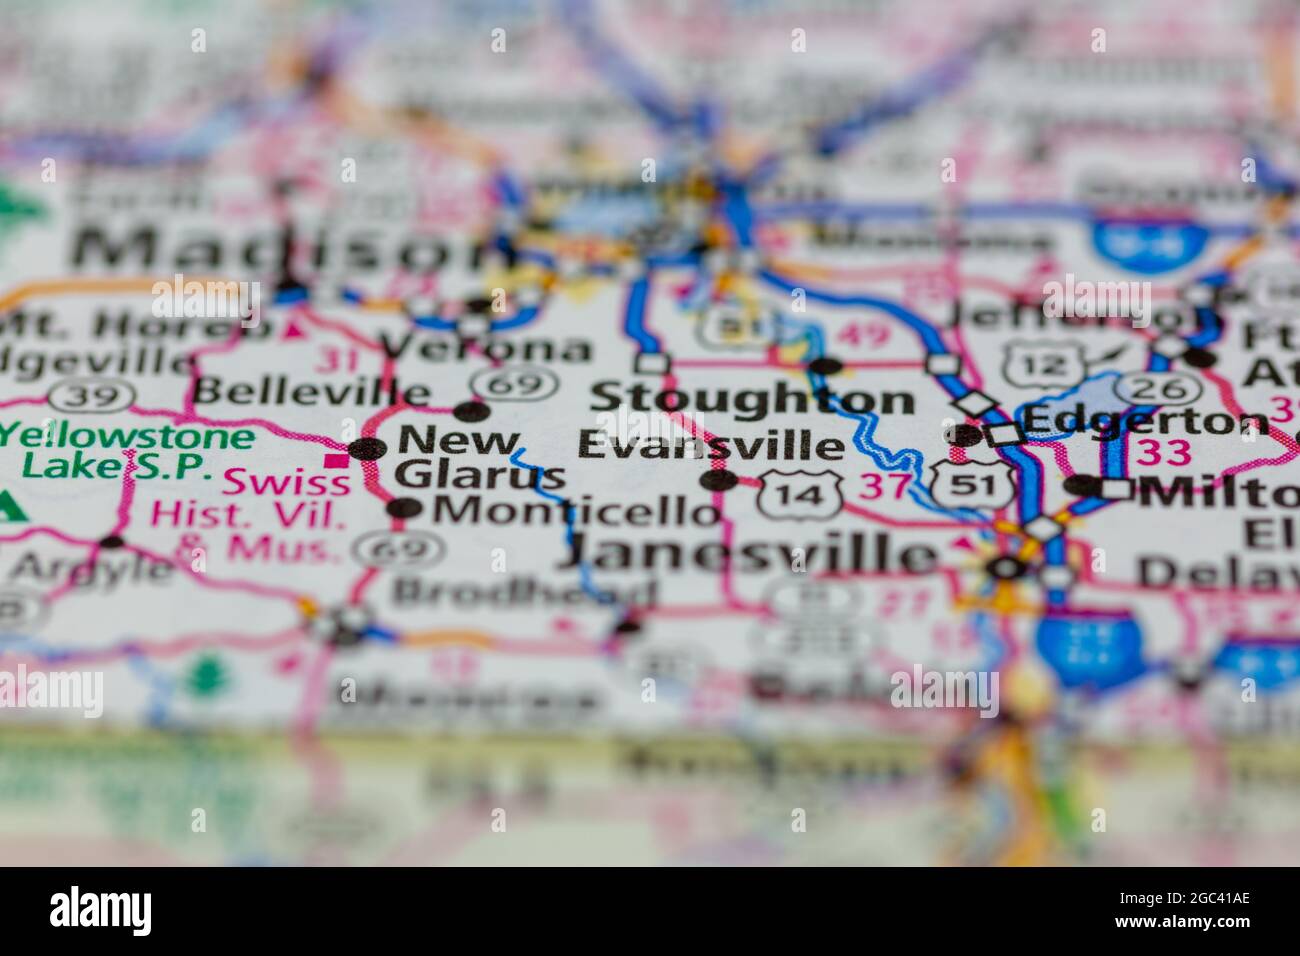 Evansville Wisconsin Usa Shown On A Road Map Or Geography Map 2GC41AE 